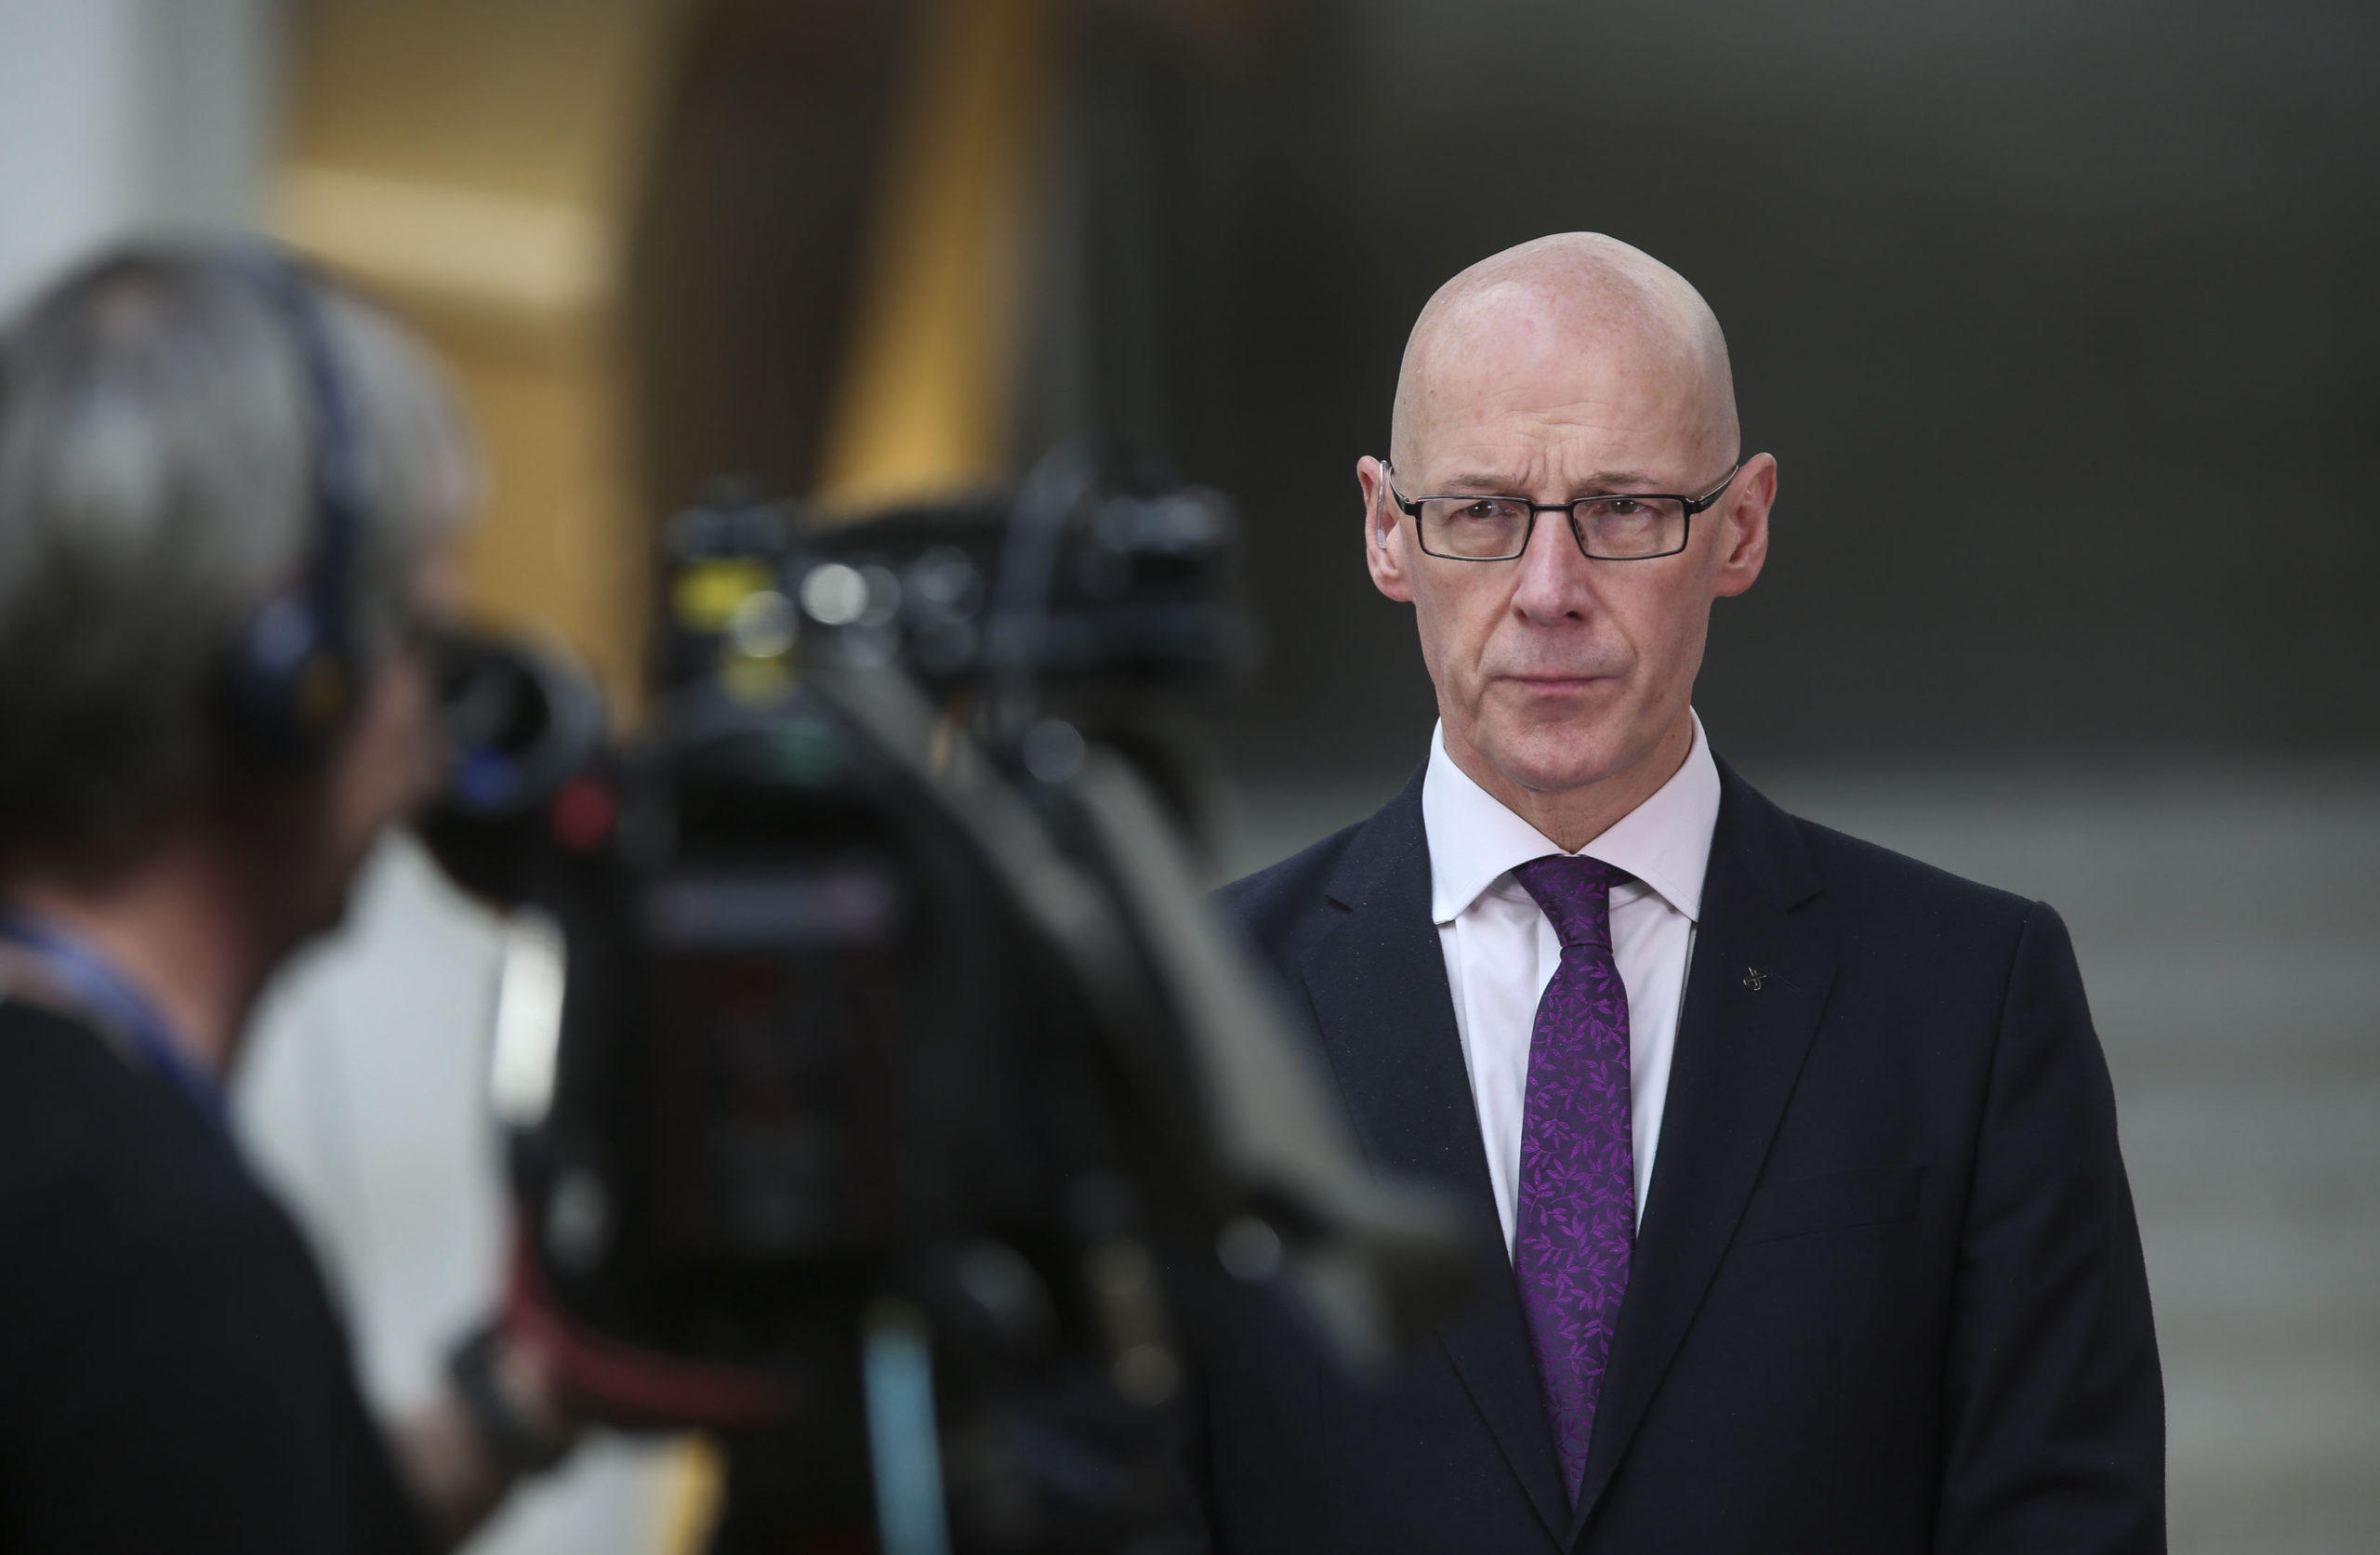 Education Minister John Swinney during a press briefing in June 2020